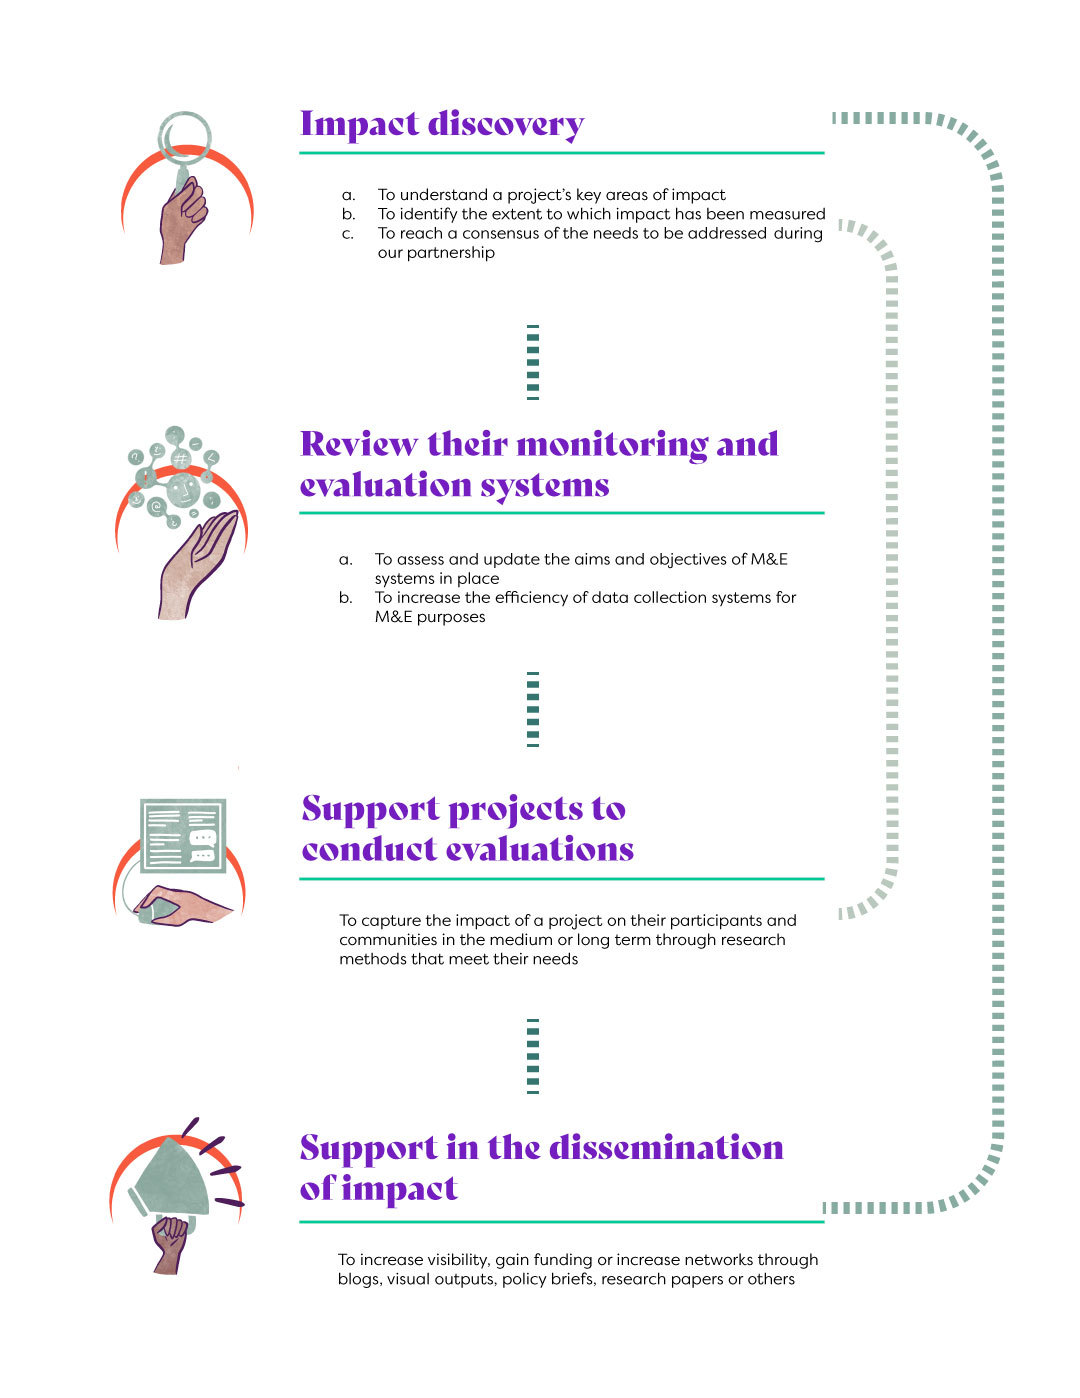 This illustration shows the different steps taken by Ember to evolve a way to measure impact of innovators we work with.